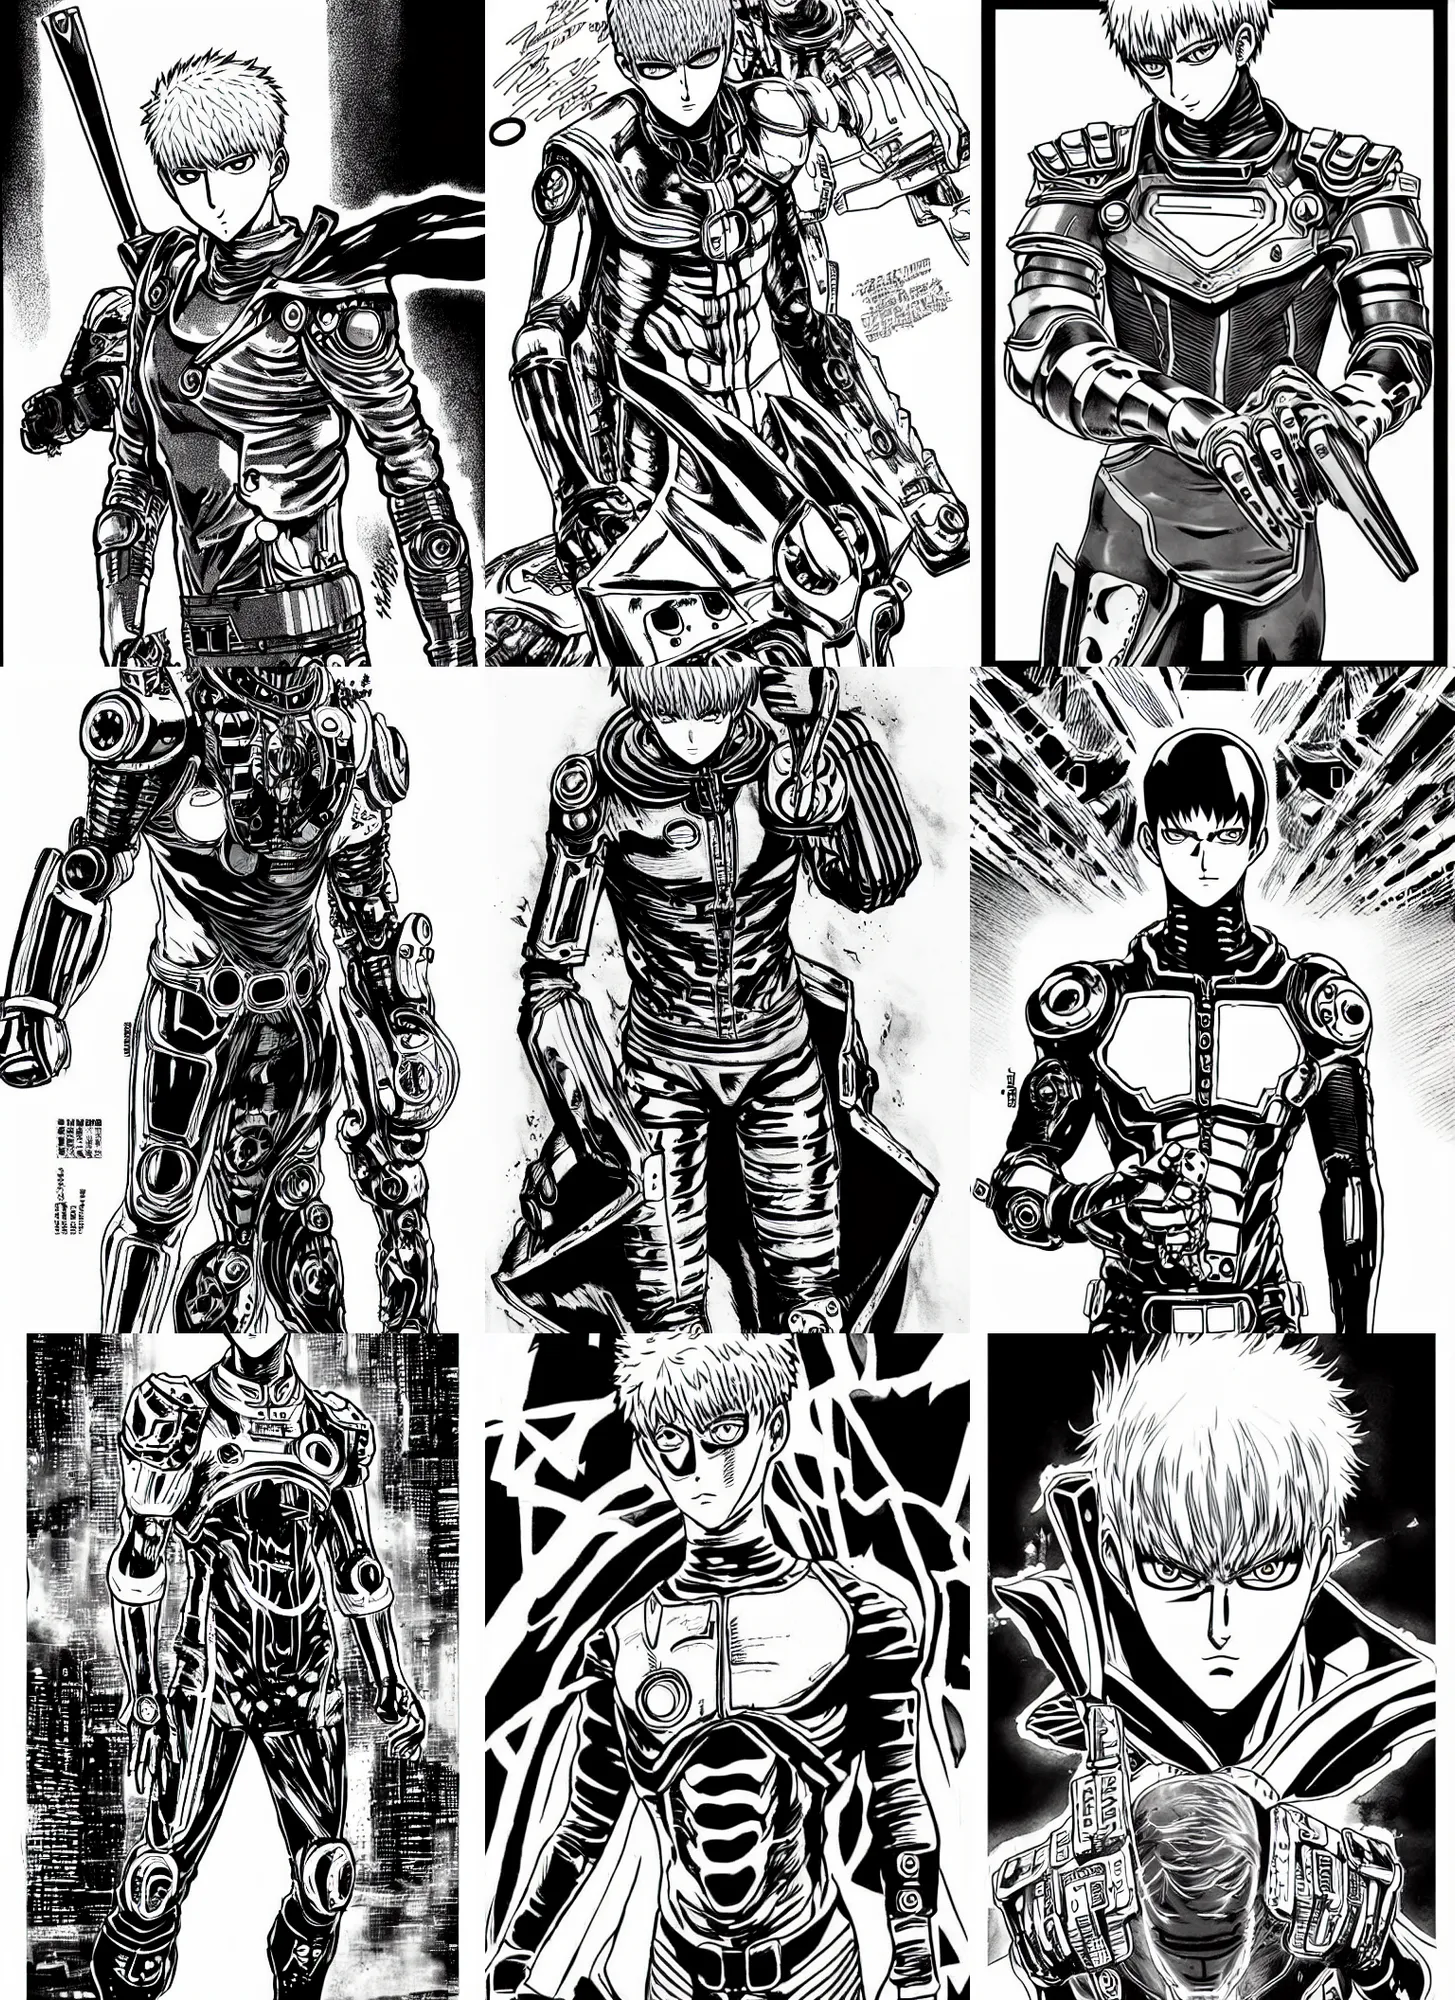 How To Draw Genos | Step By Step | One Punch Man - YouTube